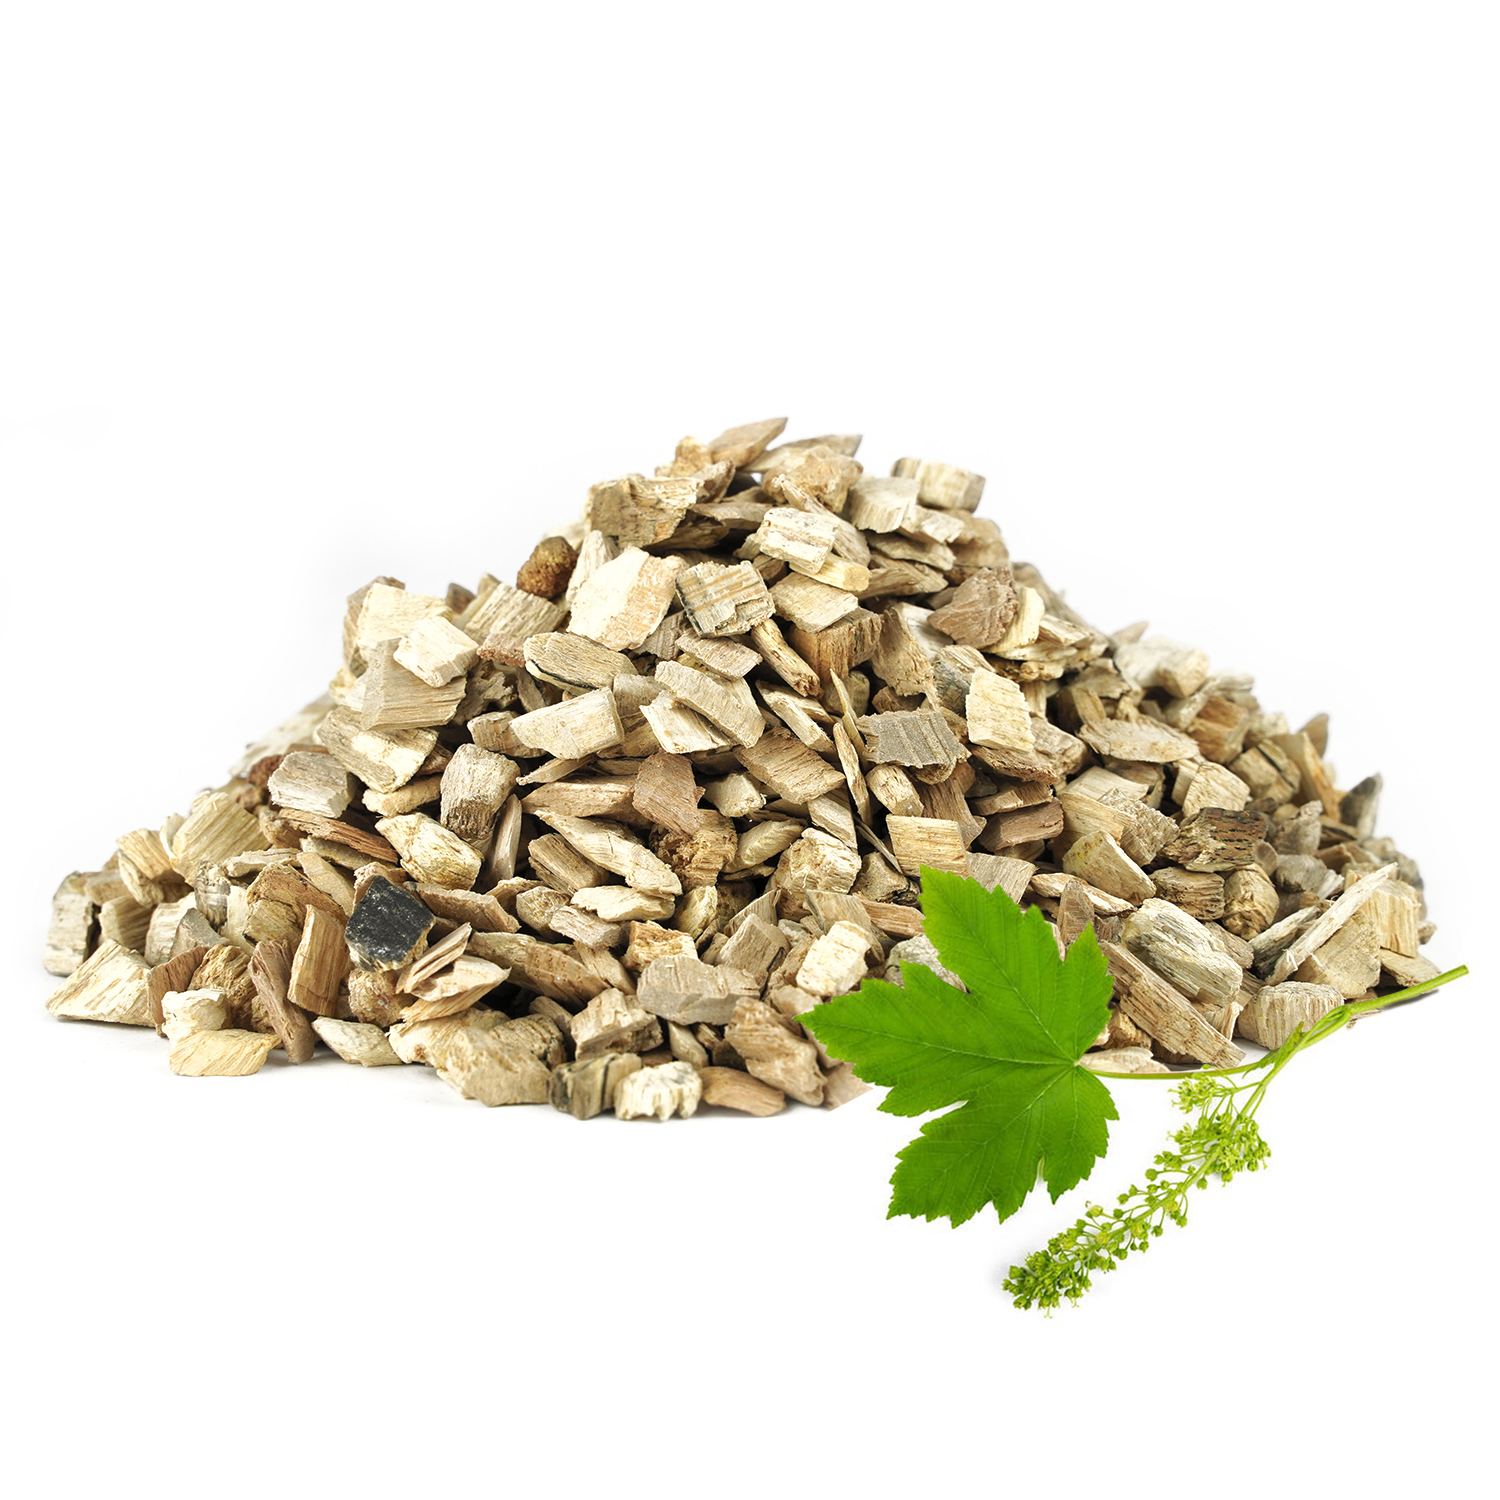 Eurocatch Rookhout | Esdoorn Snippers | Maple | 4Ltr | 1Kg